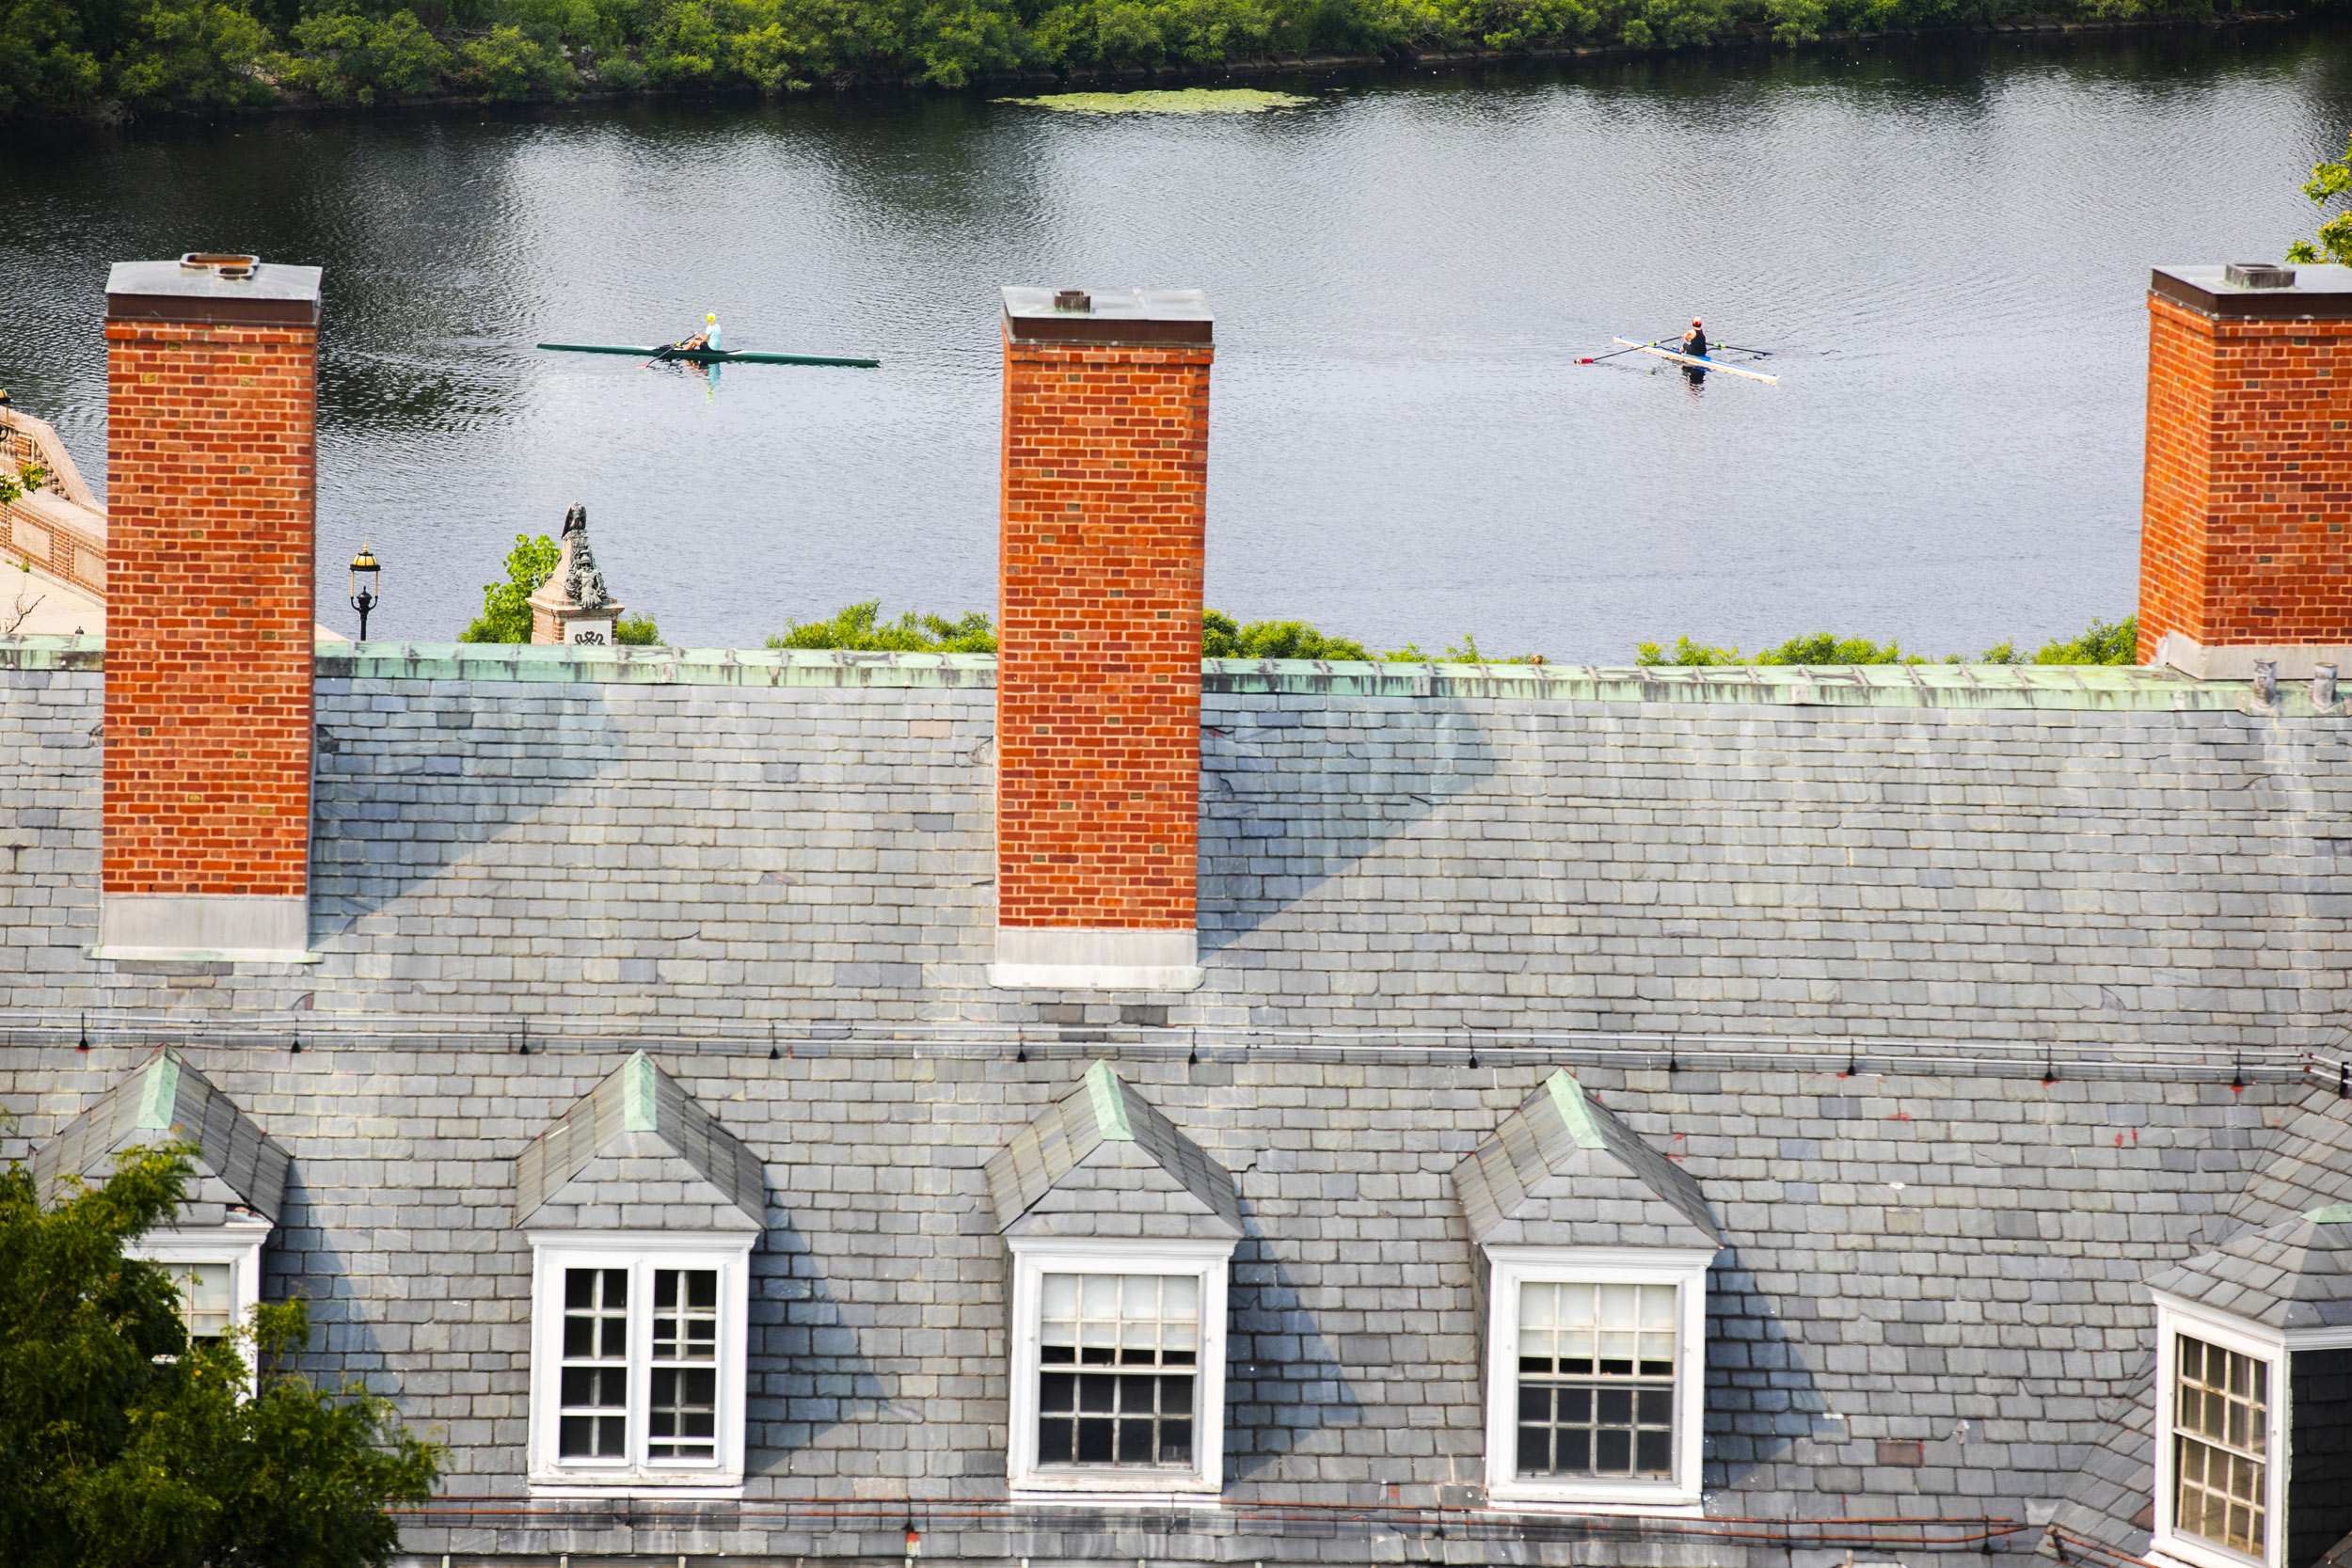 The chimneys of Eliot House frame rowers along the Charles River.